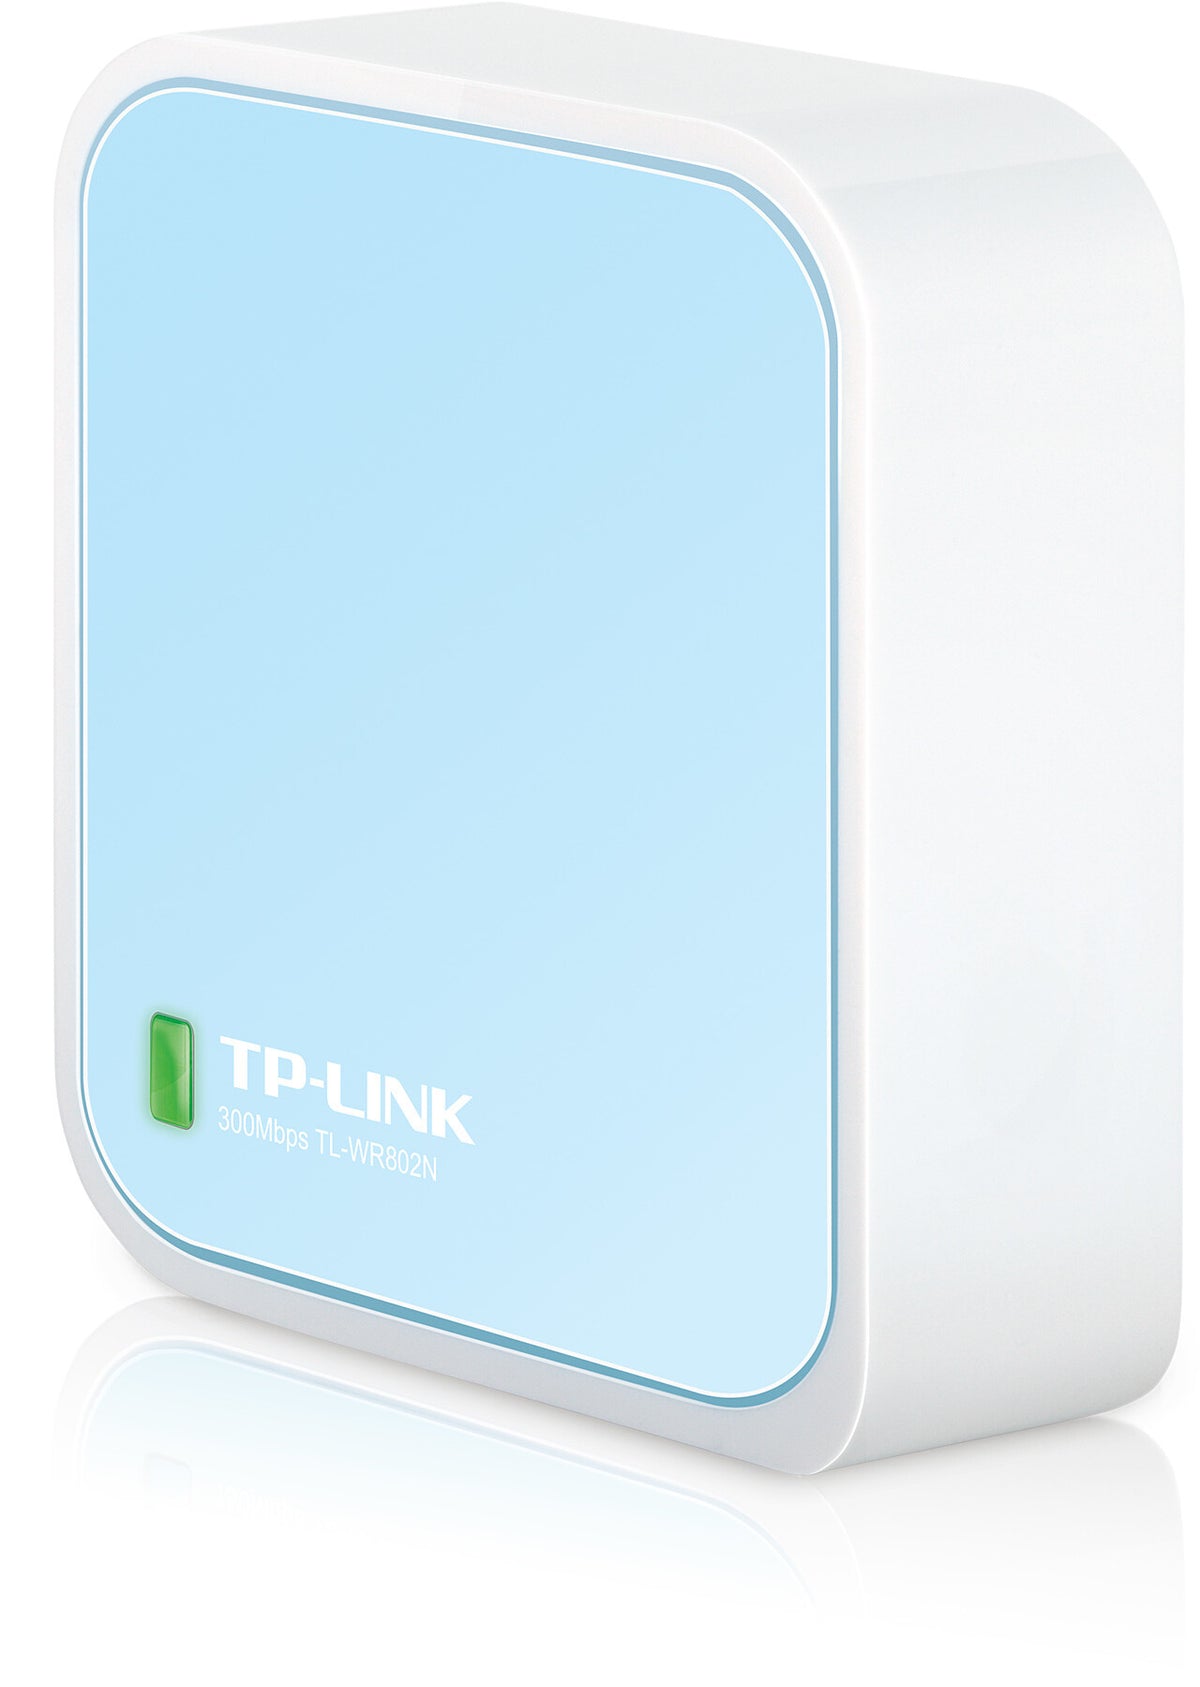 TP-Link TL-WR802N - Fast Ethernet Single-band (2.4 GHz) wireless router in Blue / White